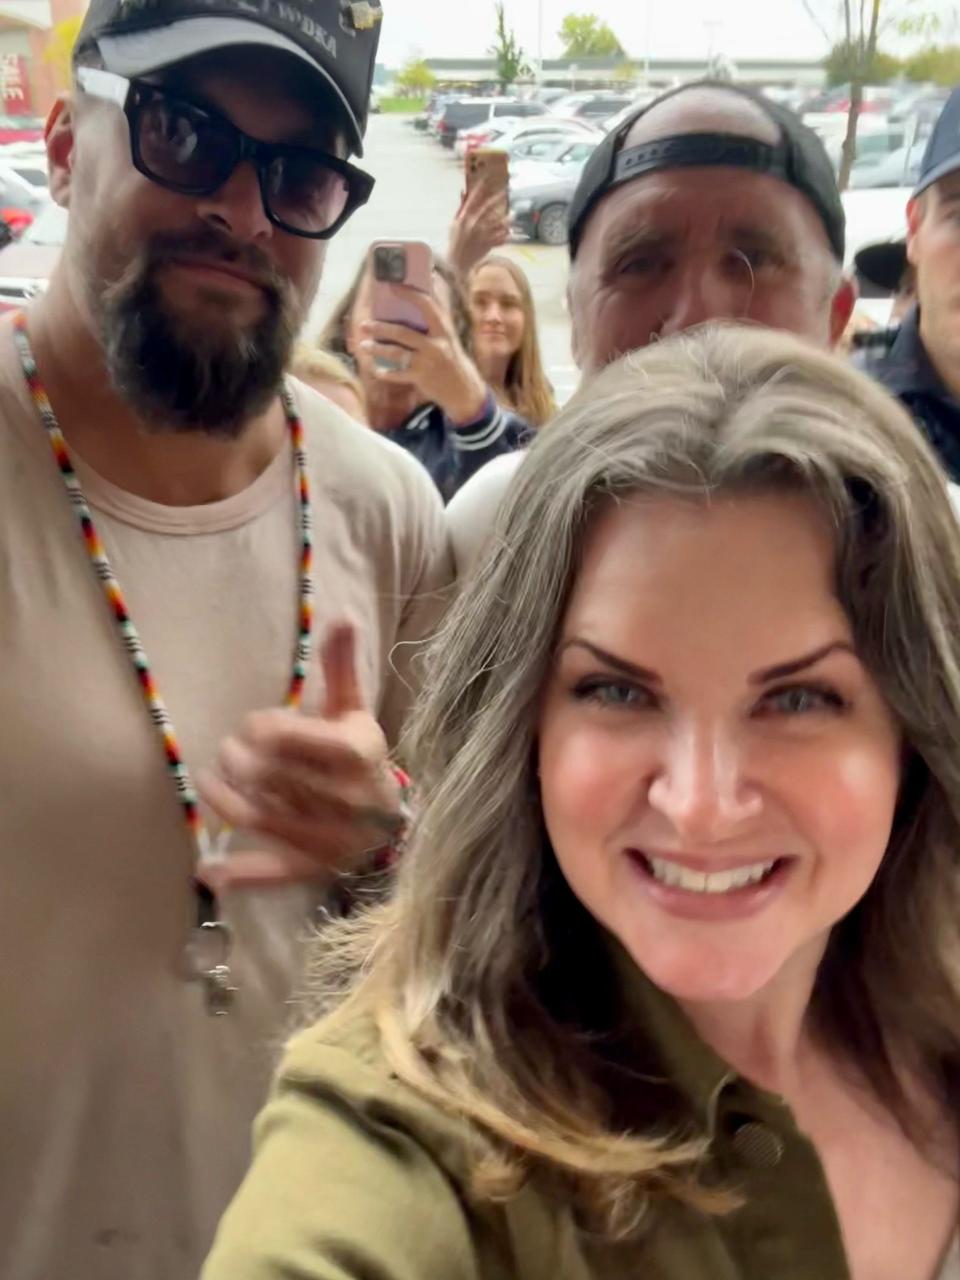 Chris Krasovich of Pewaukee takes a selfie with actor Jason Momoa outside Brookfield's Total Wine & More on Thursday. Momoa came to town to promote his new premium vodka brand, Meili, with co-founder and friend Blaine Halvorson.